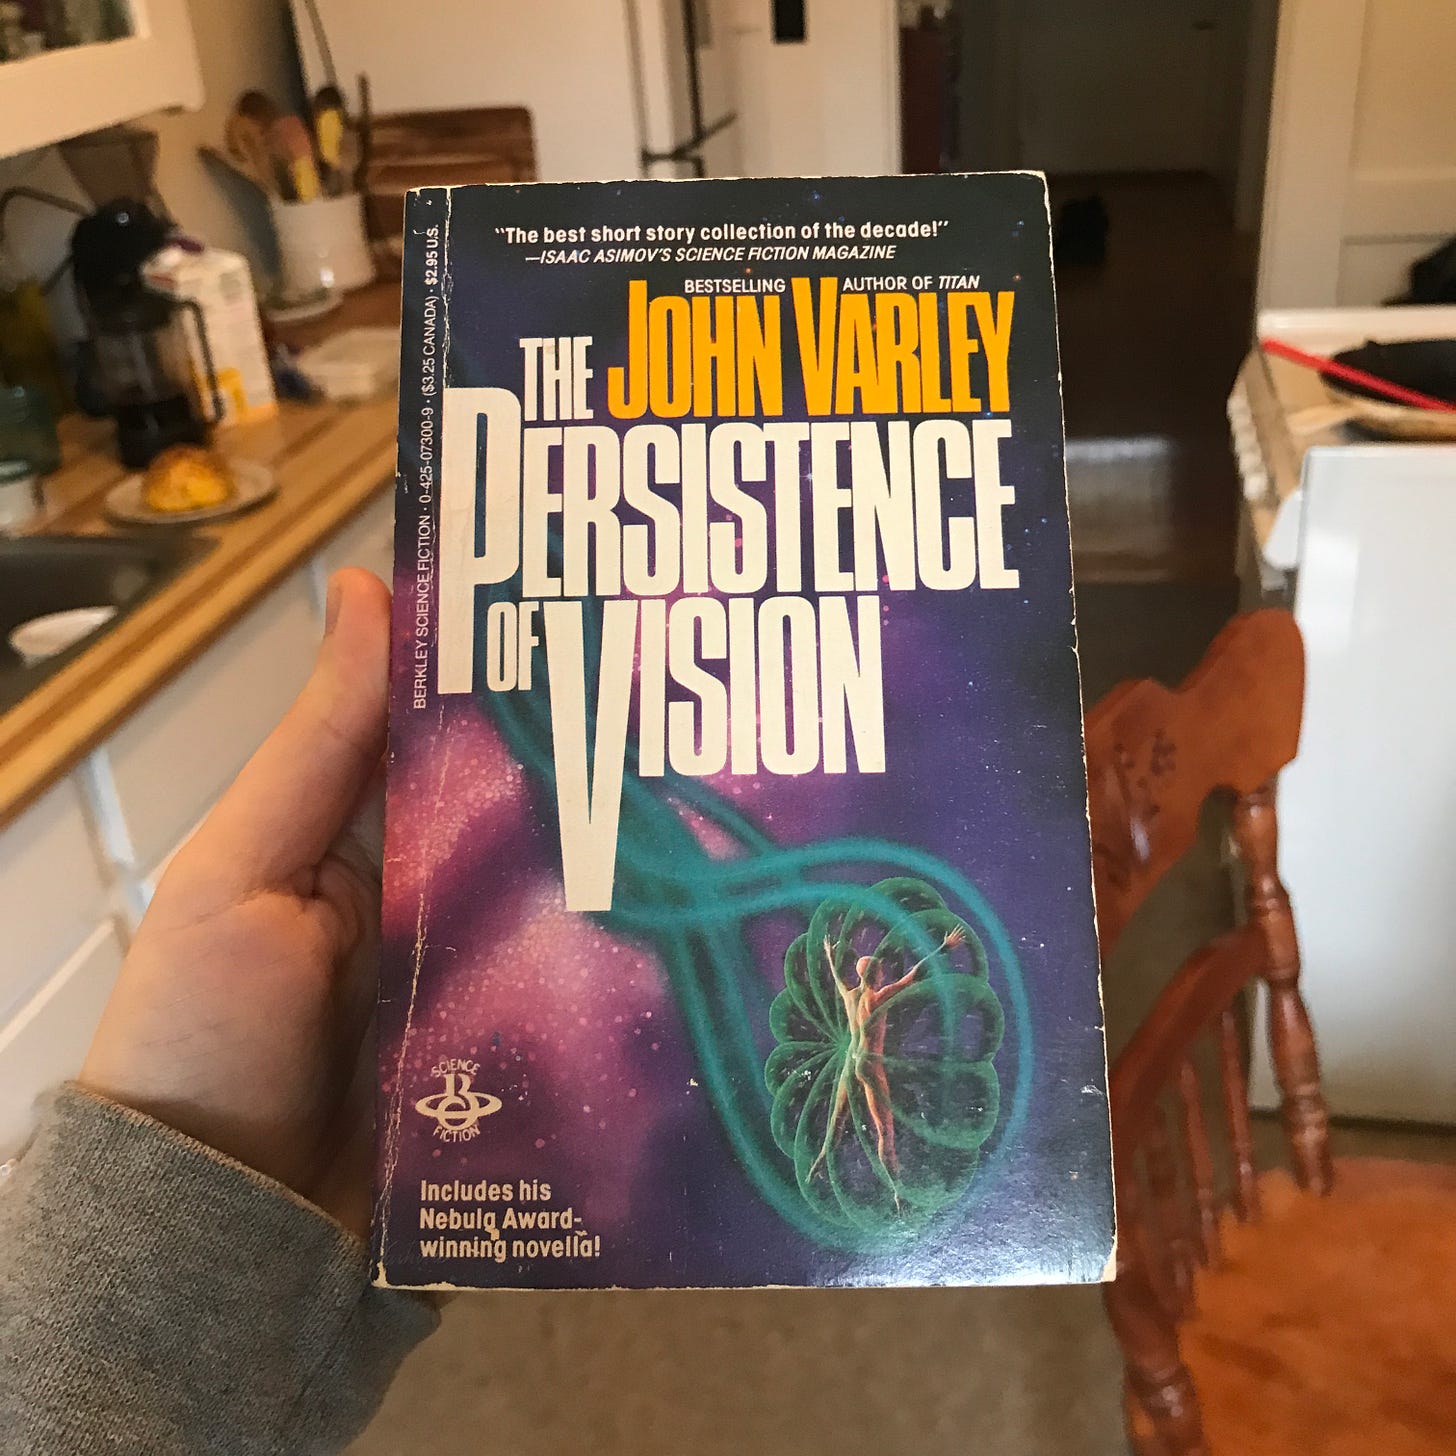 I’m holding a copy of John Varley’s short story collection “The Persistence of Vision.” 